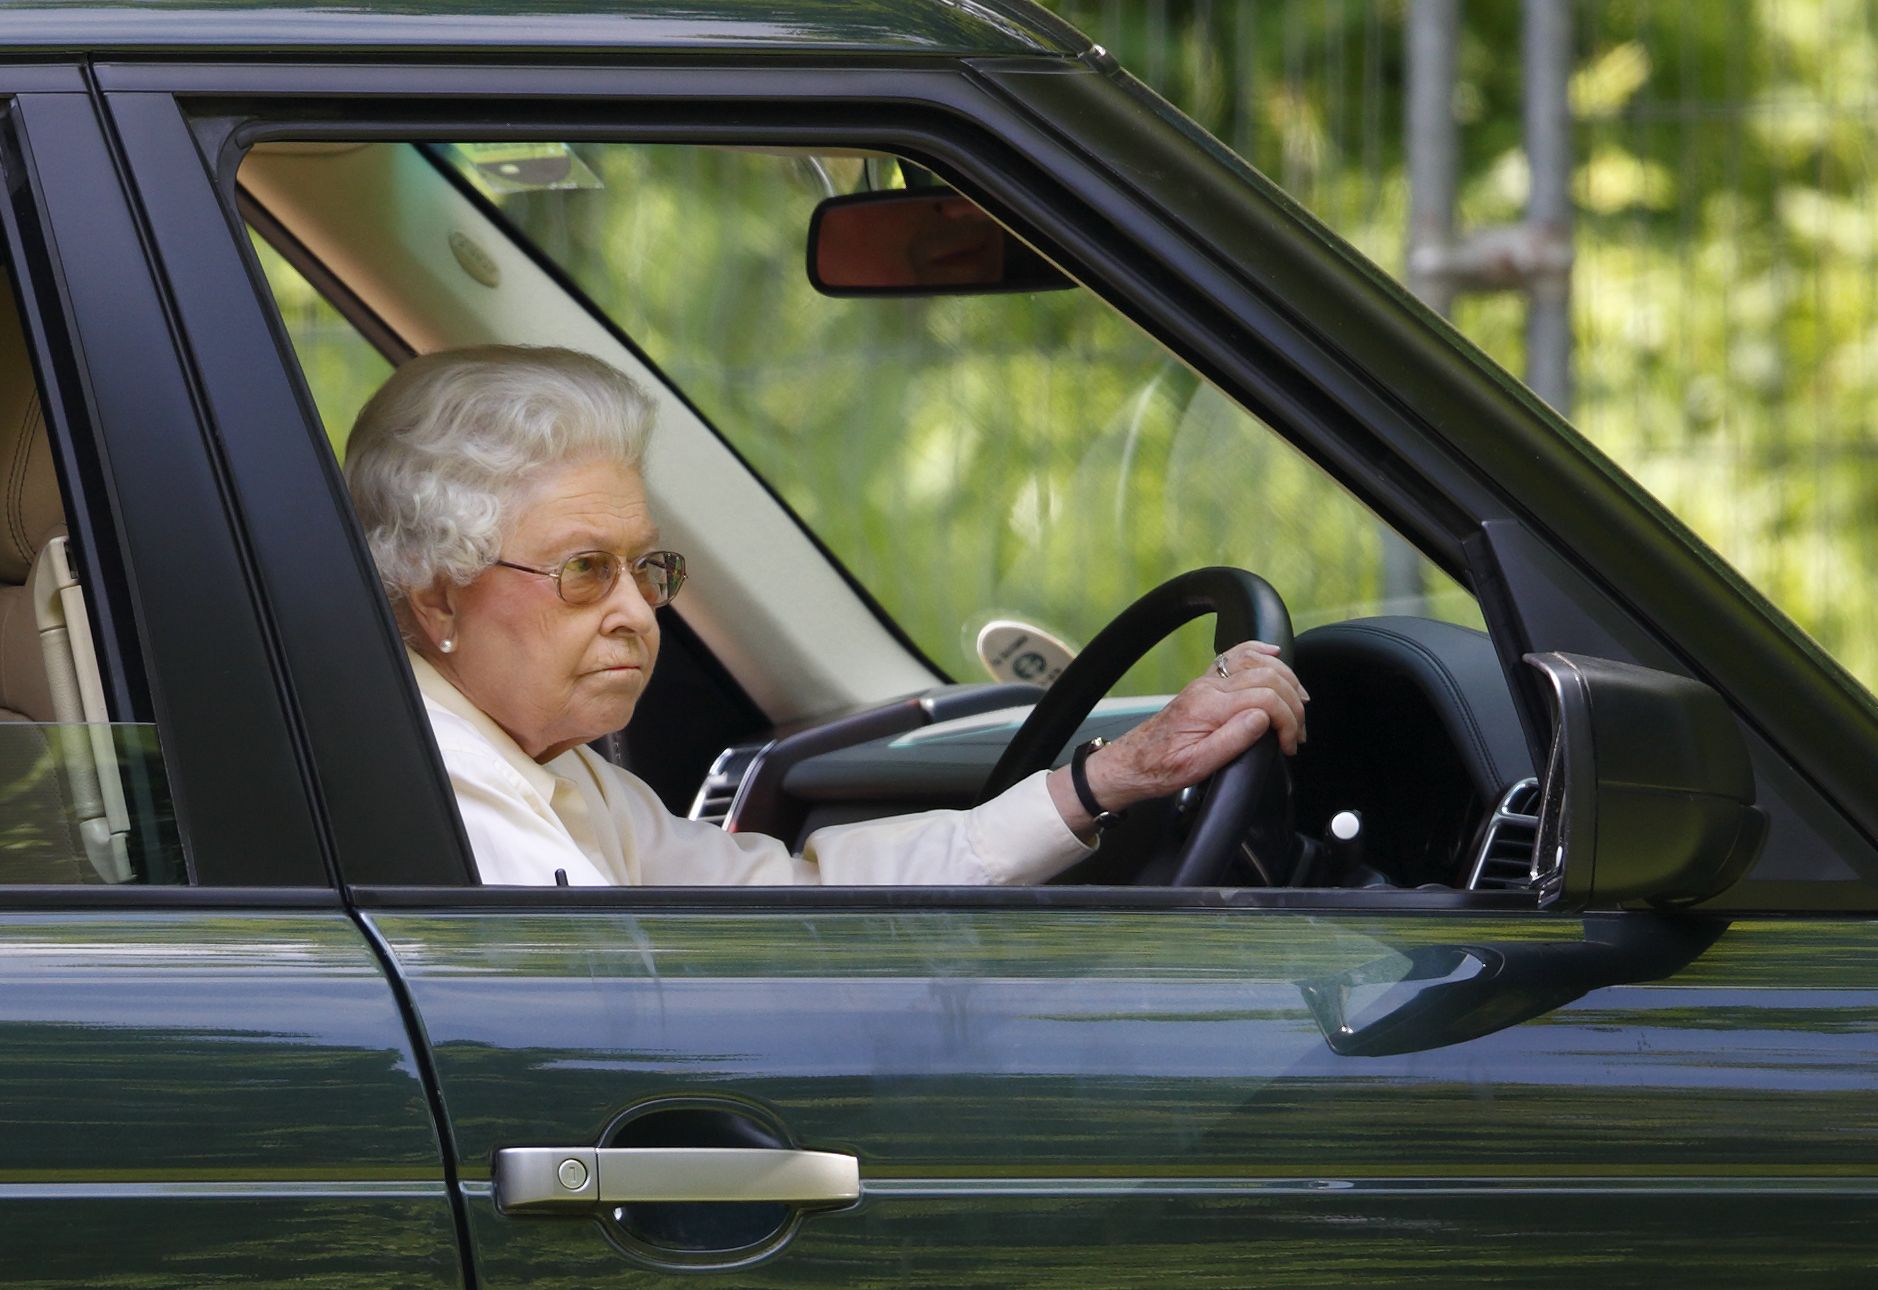 Land Rover and the Queen